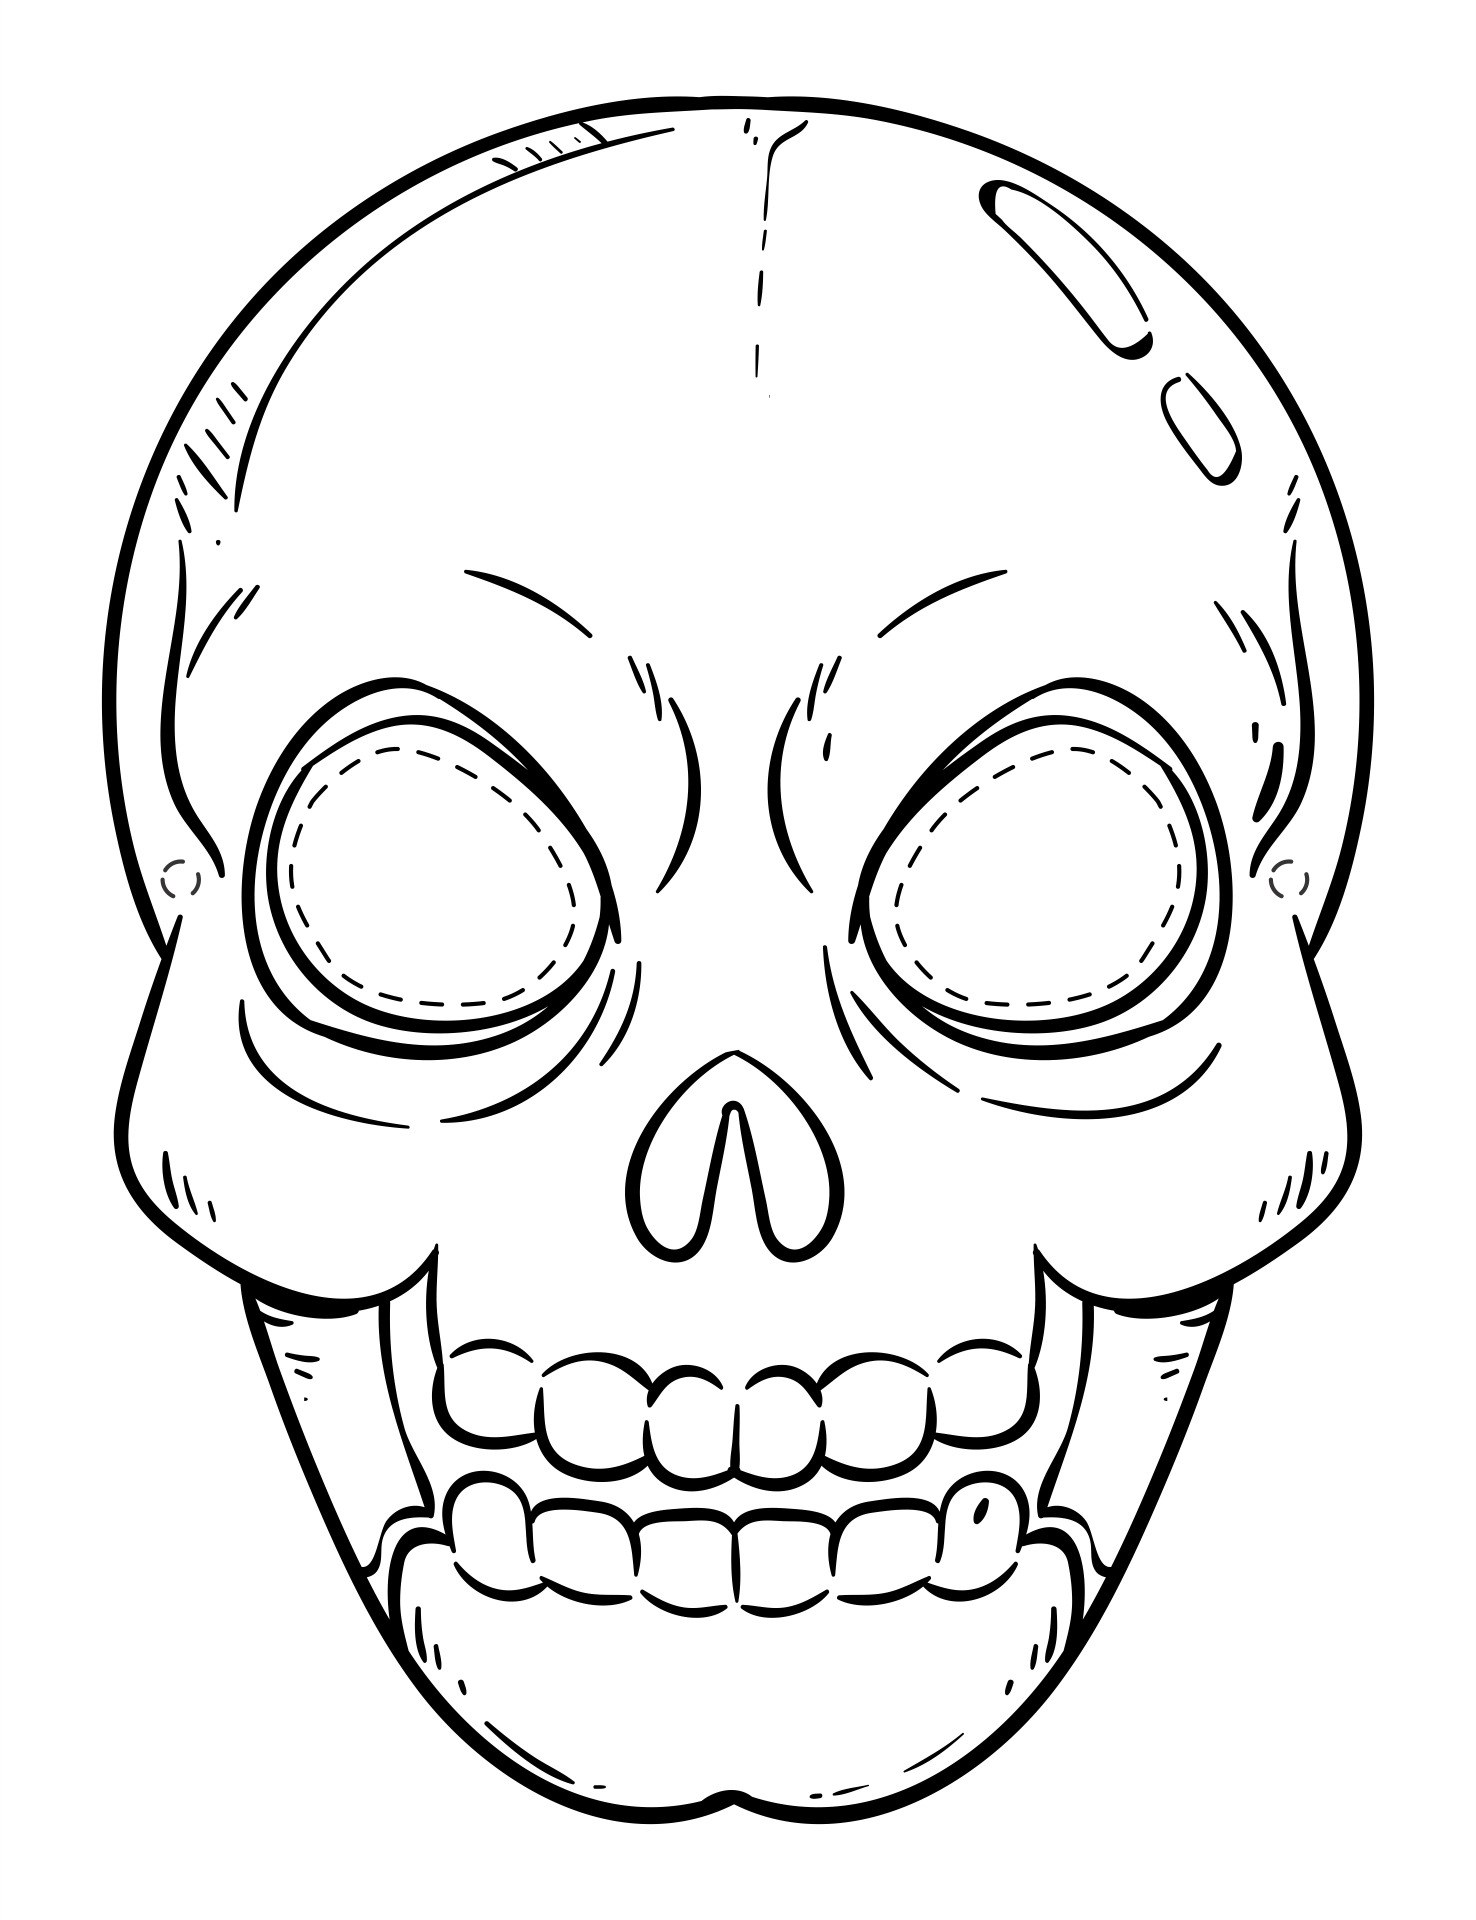 8 Best Images of Printable Halloween Masks To Color - Printable ...